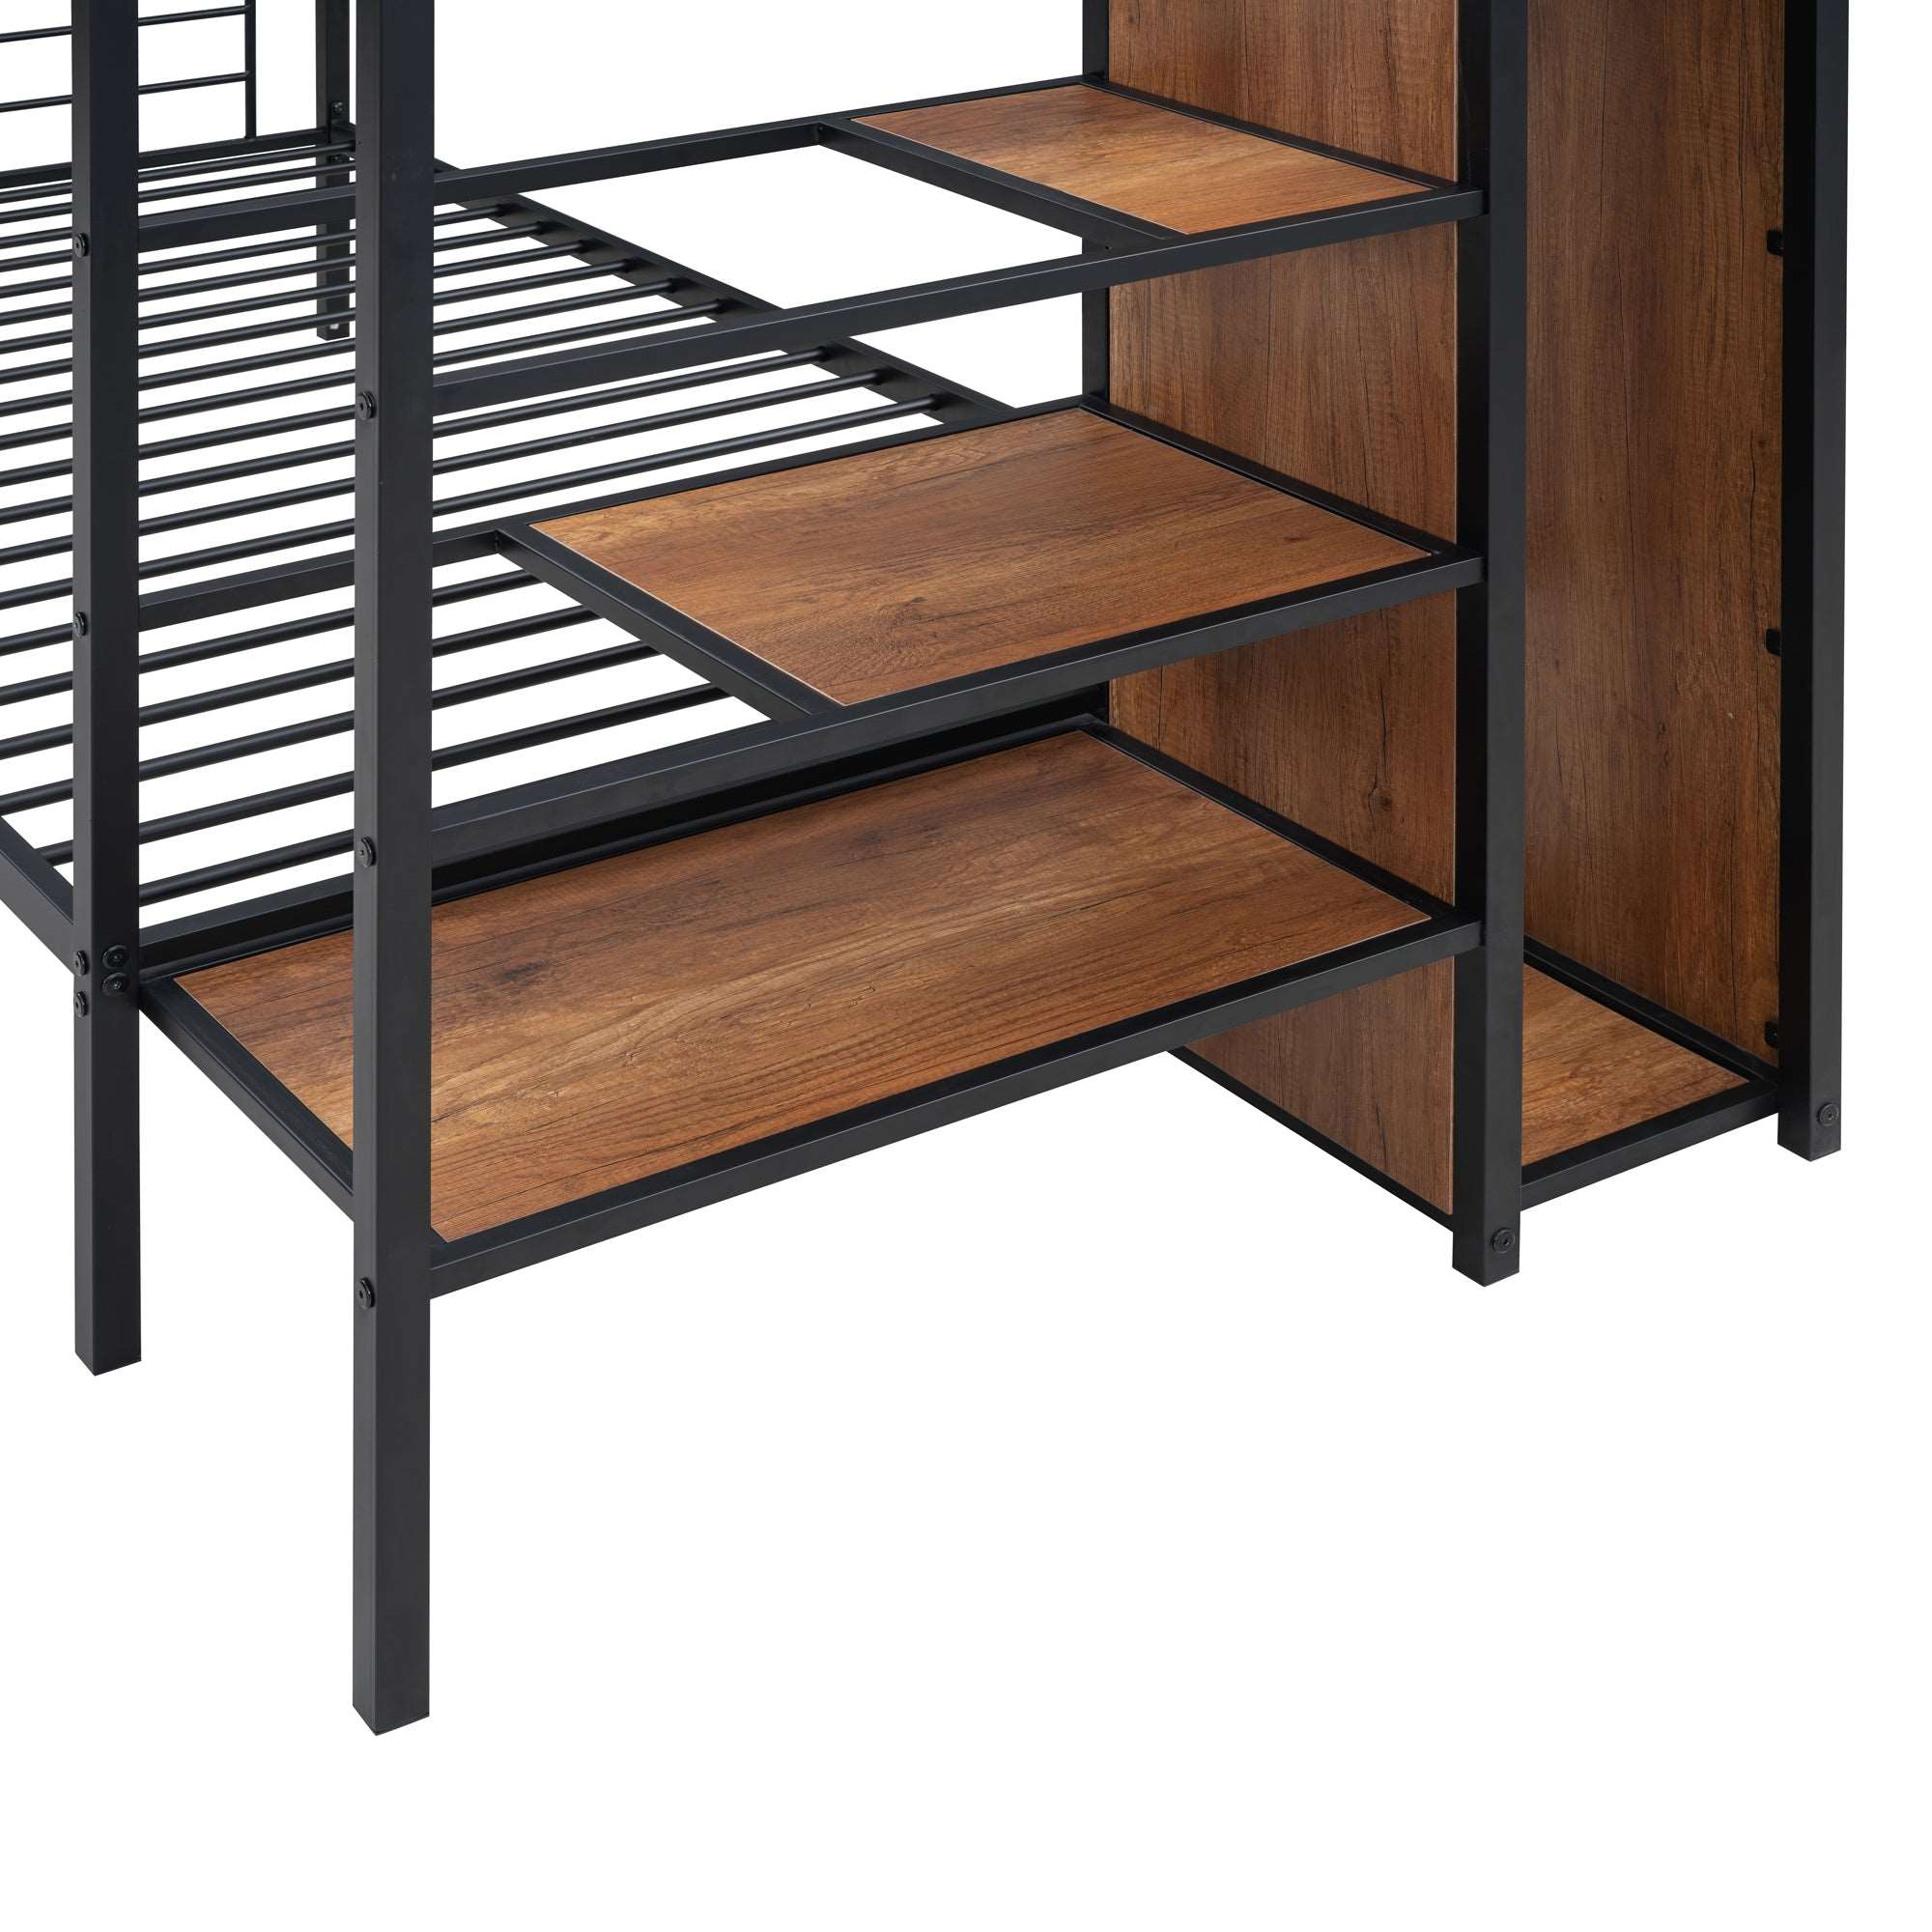 Bellemave Metal Bunk Bed with Lateral Storage Ladder and Wardrobe